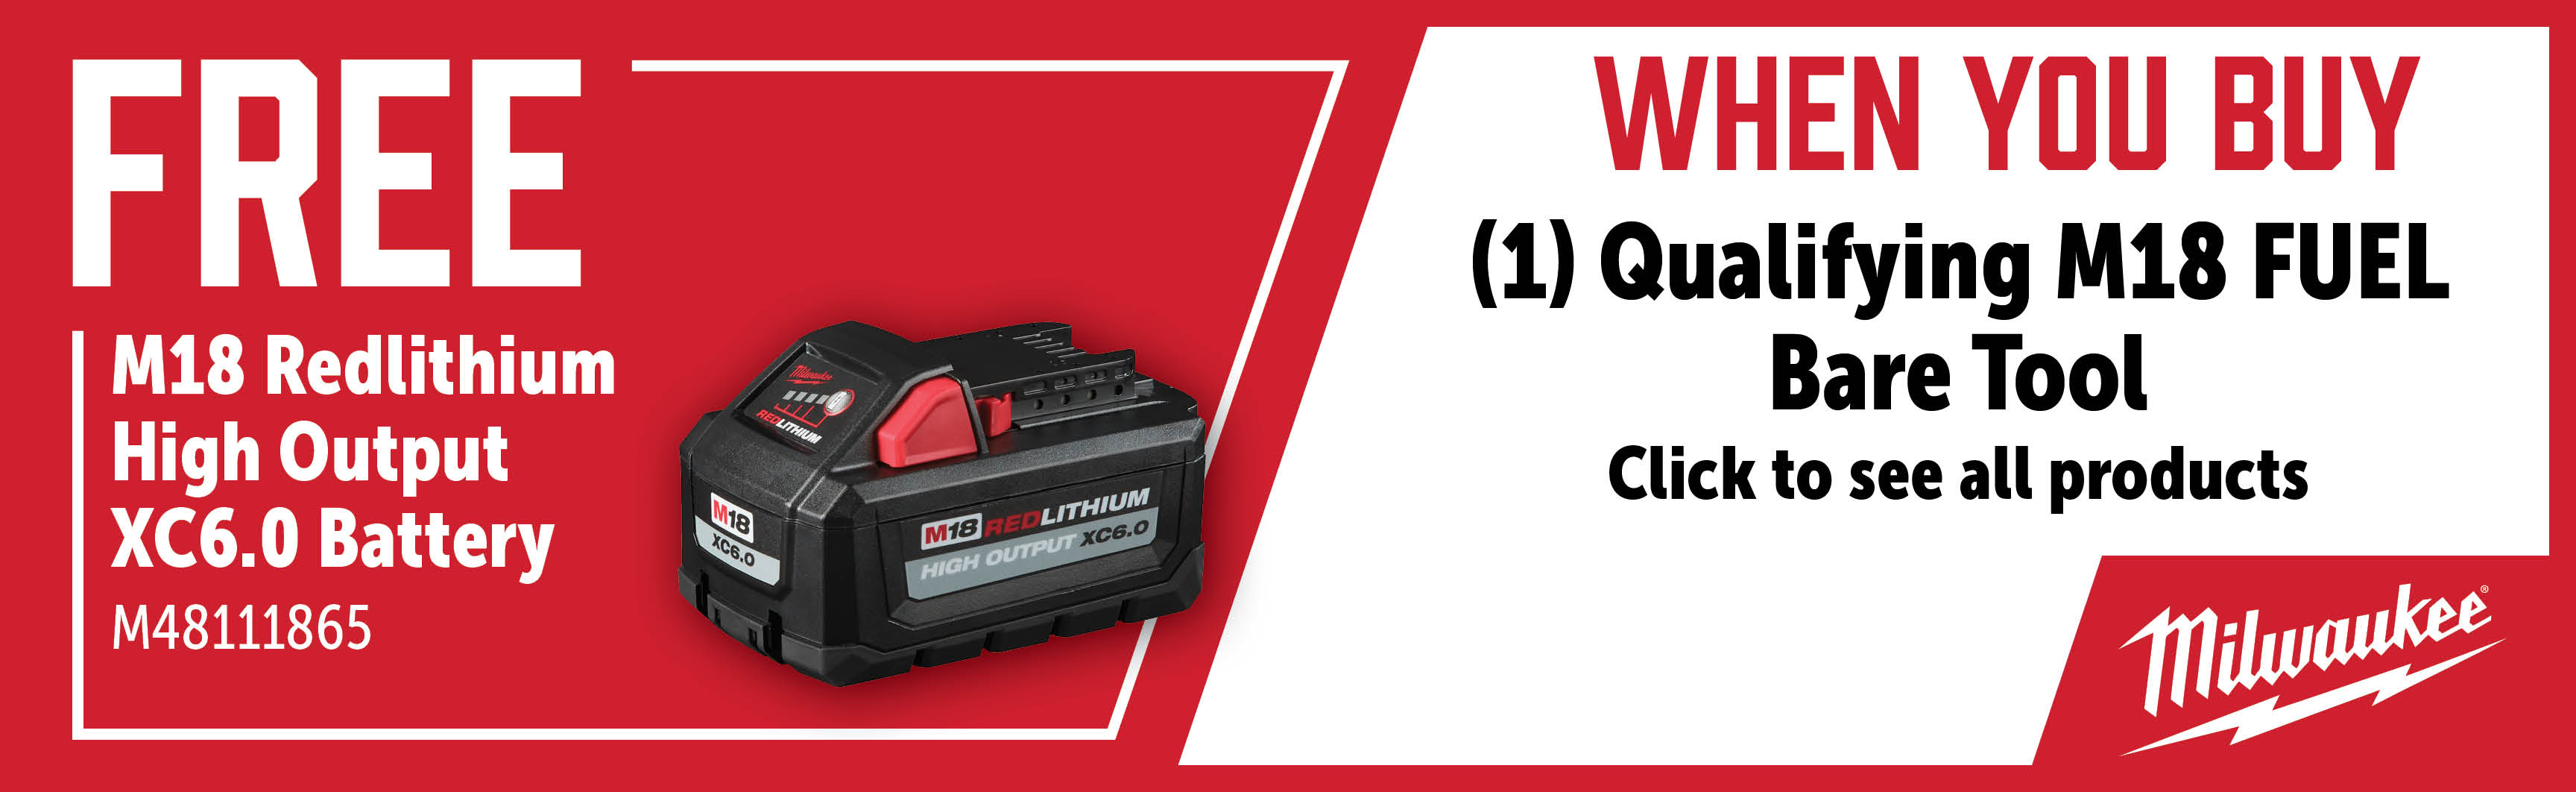 Milwaukee Aug-Oct: Buy a Qualifying M18 Fuel Bare Tool and Get a Free M48111865